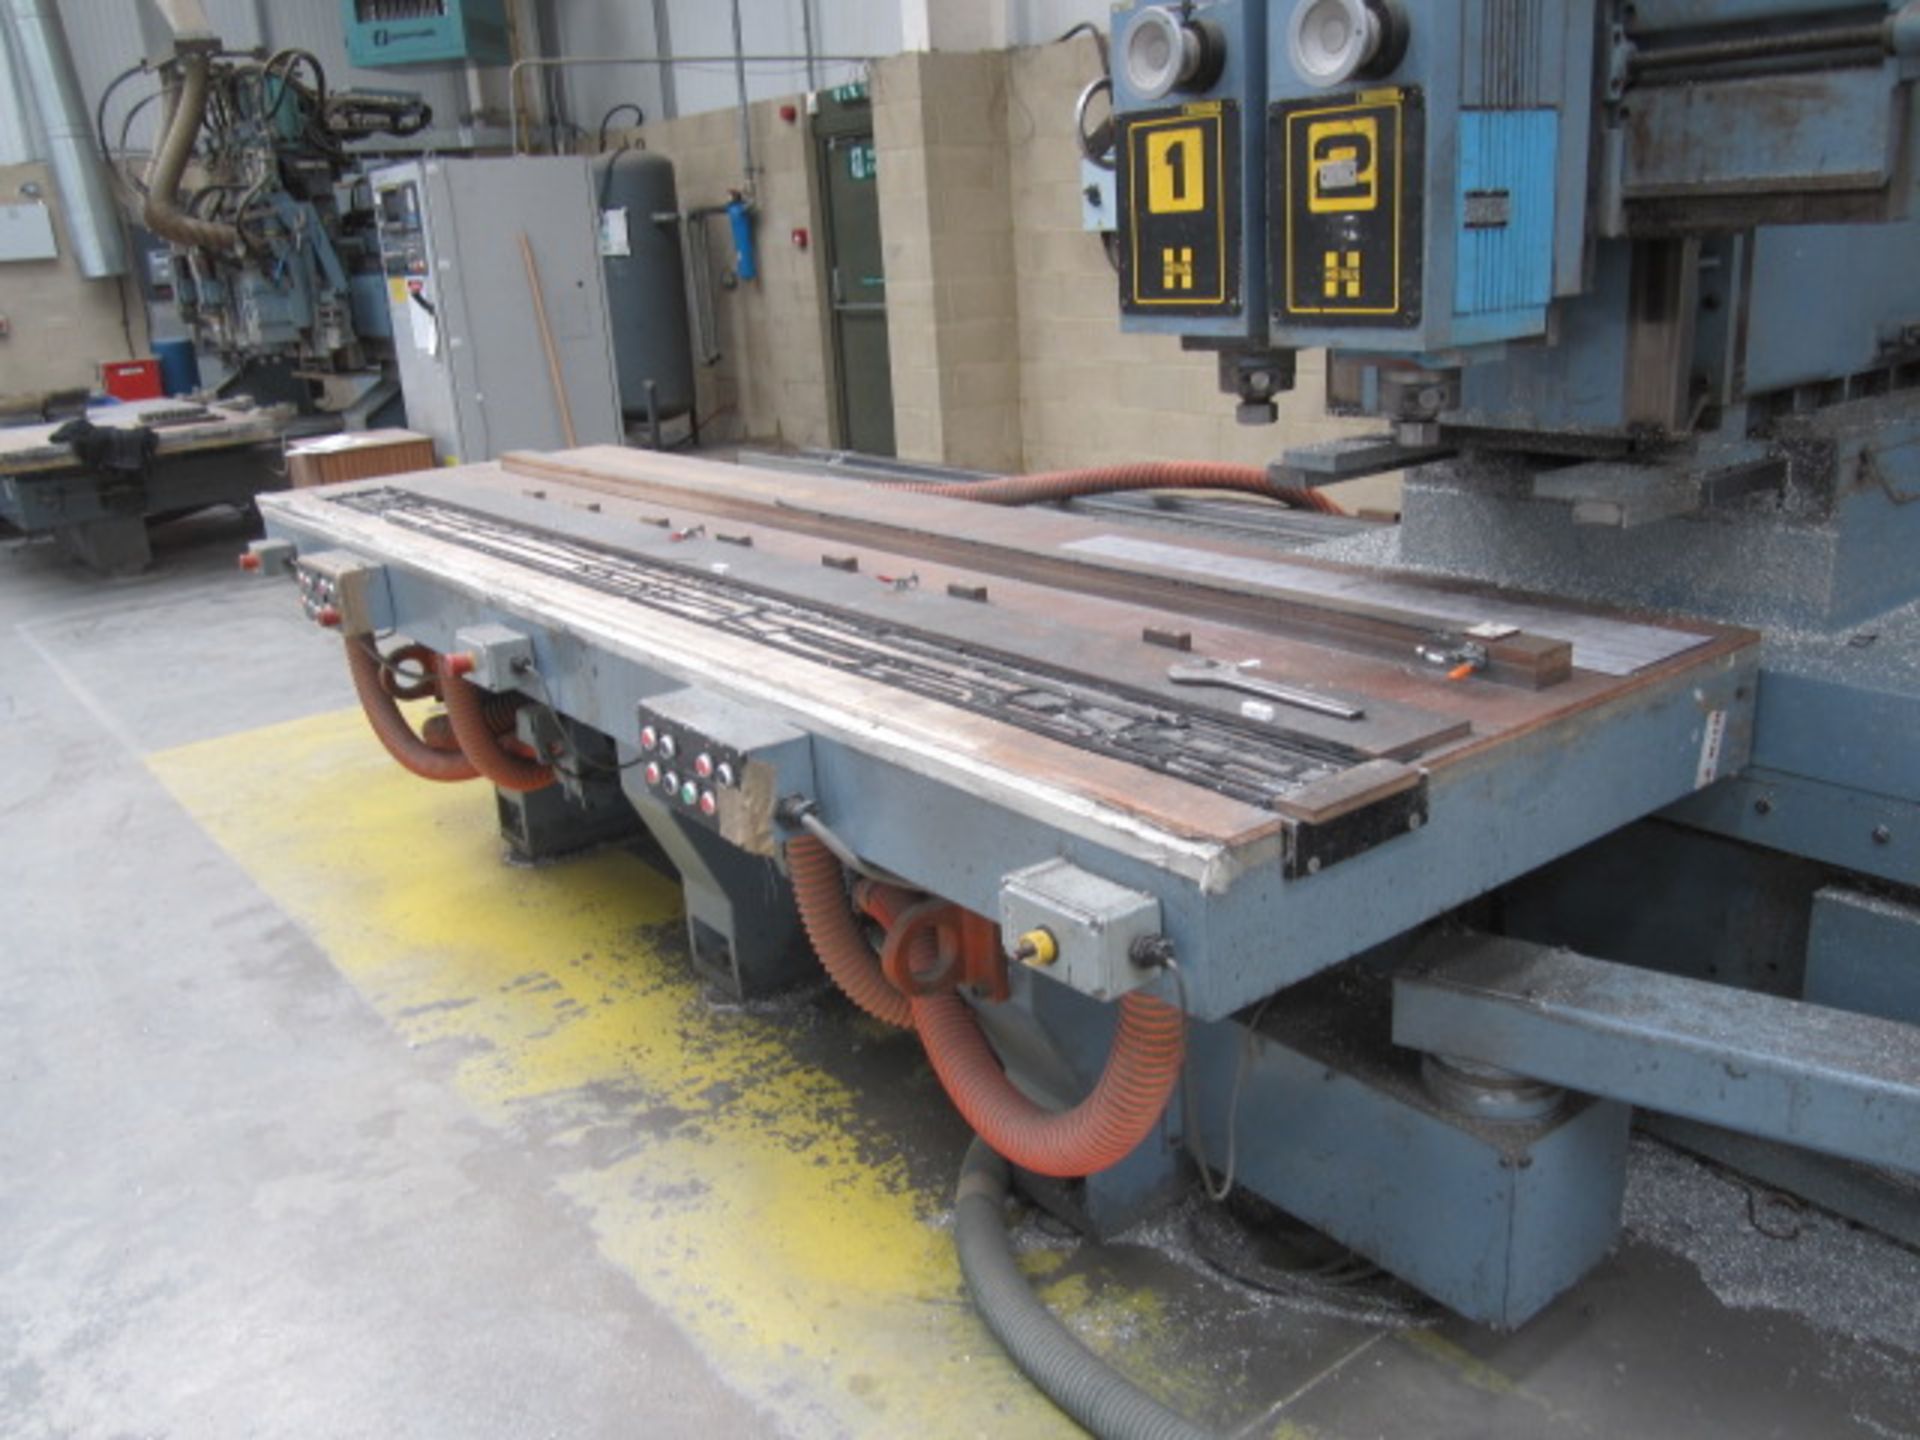 Heian NZ-2H CNC 2 head router, 3 axis, vacuum table size 3- 3000mm x 1000mm, serial no: 600615, - Image 10 of 23